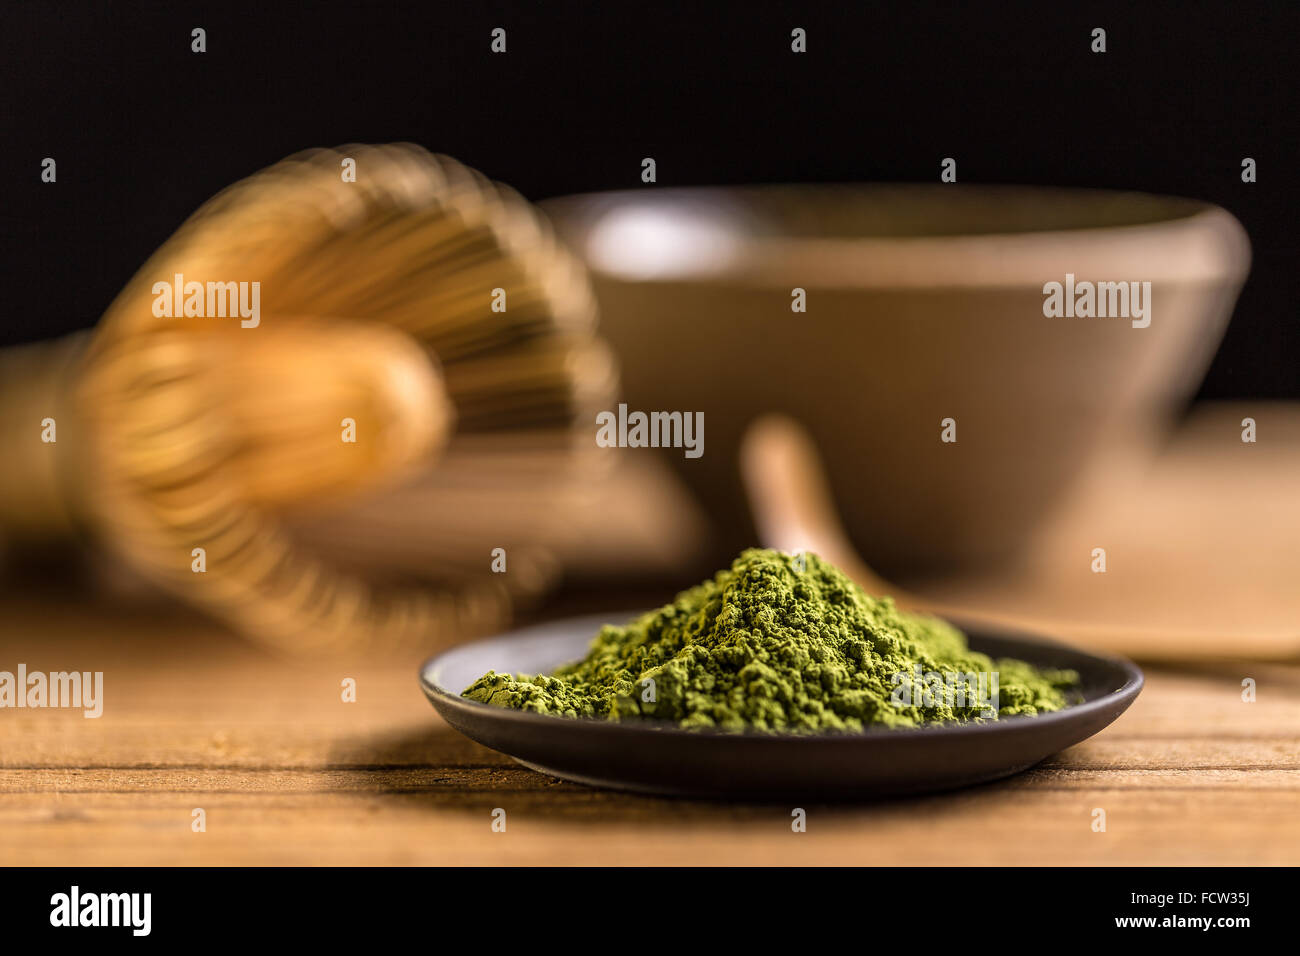 Macha green powder in a plate on wooden table Stock Photo